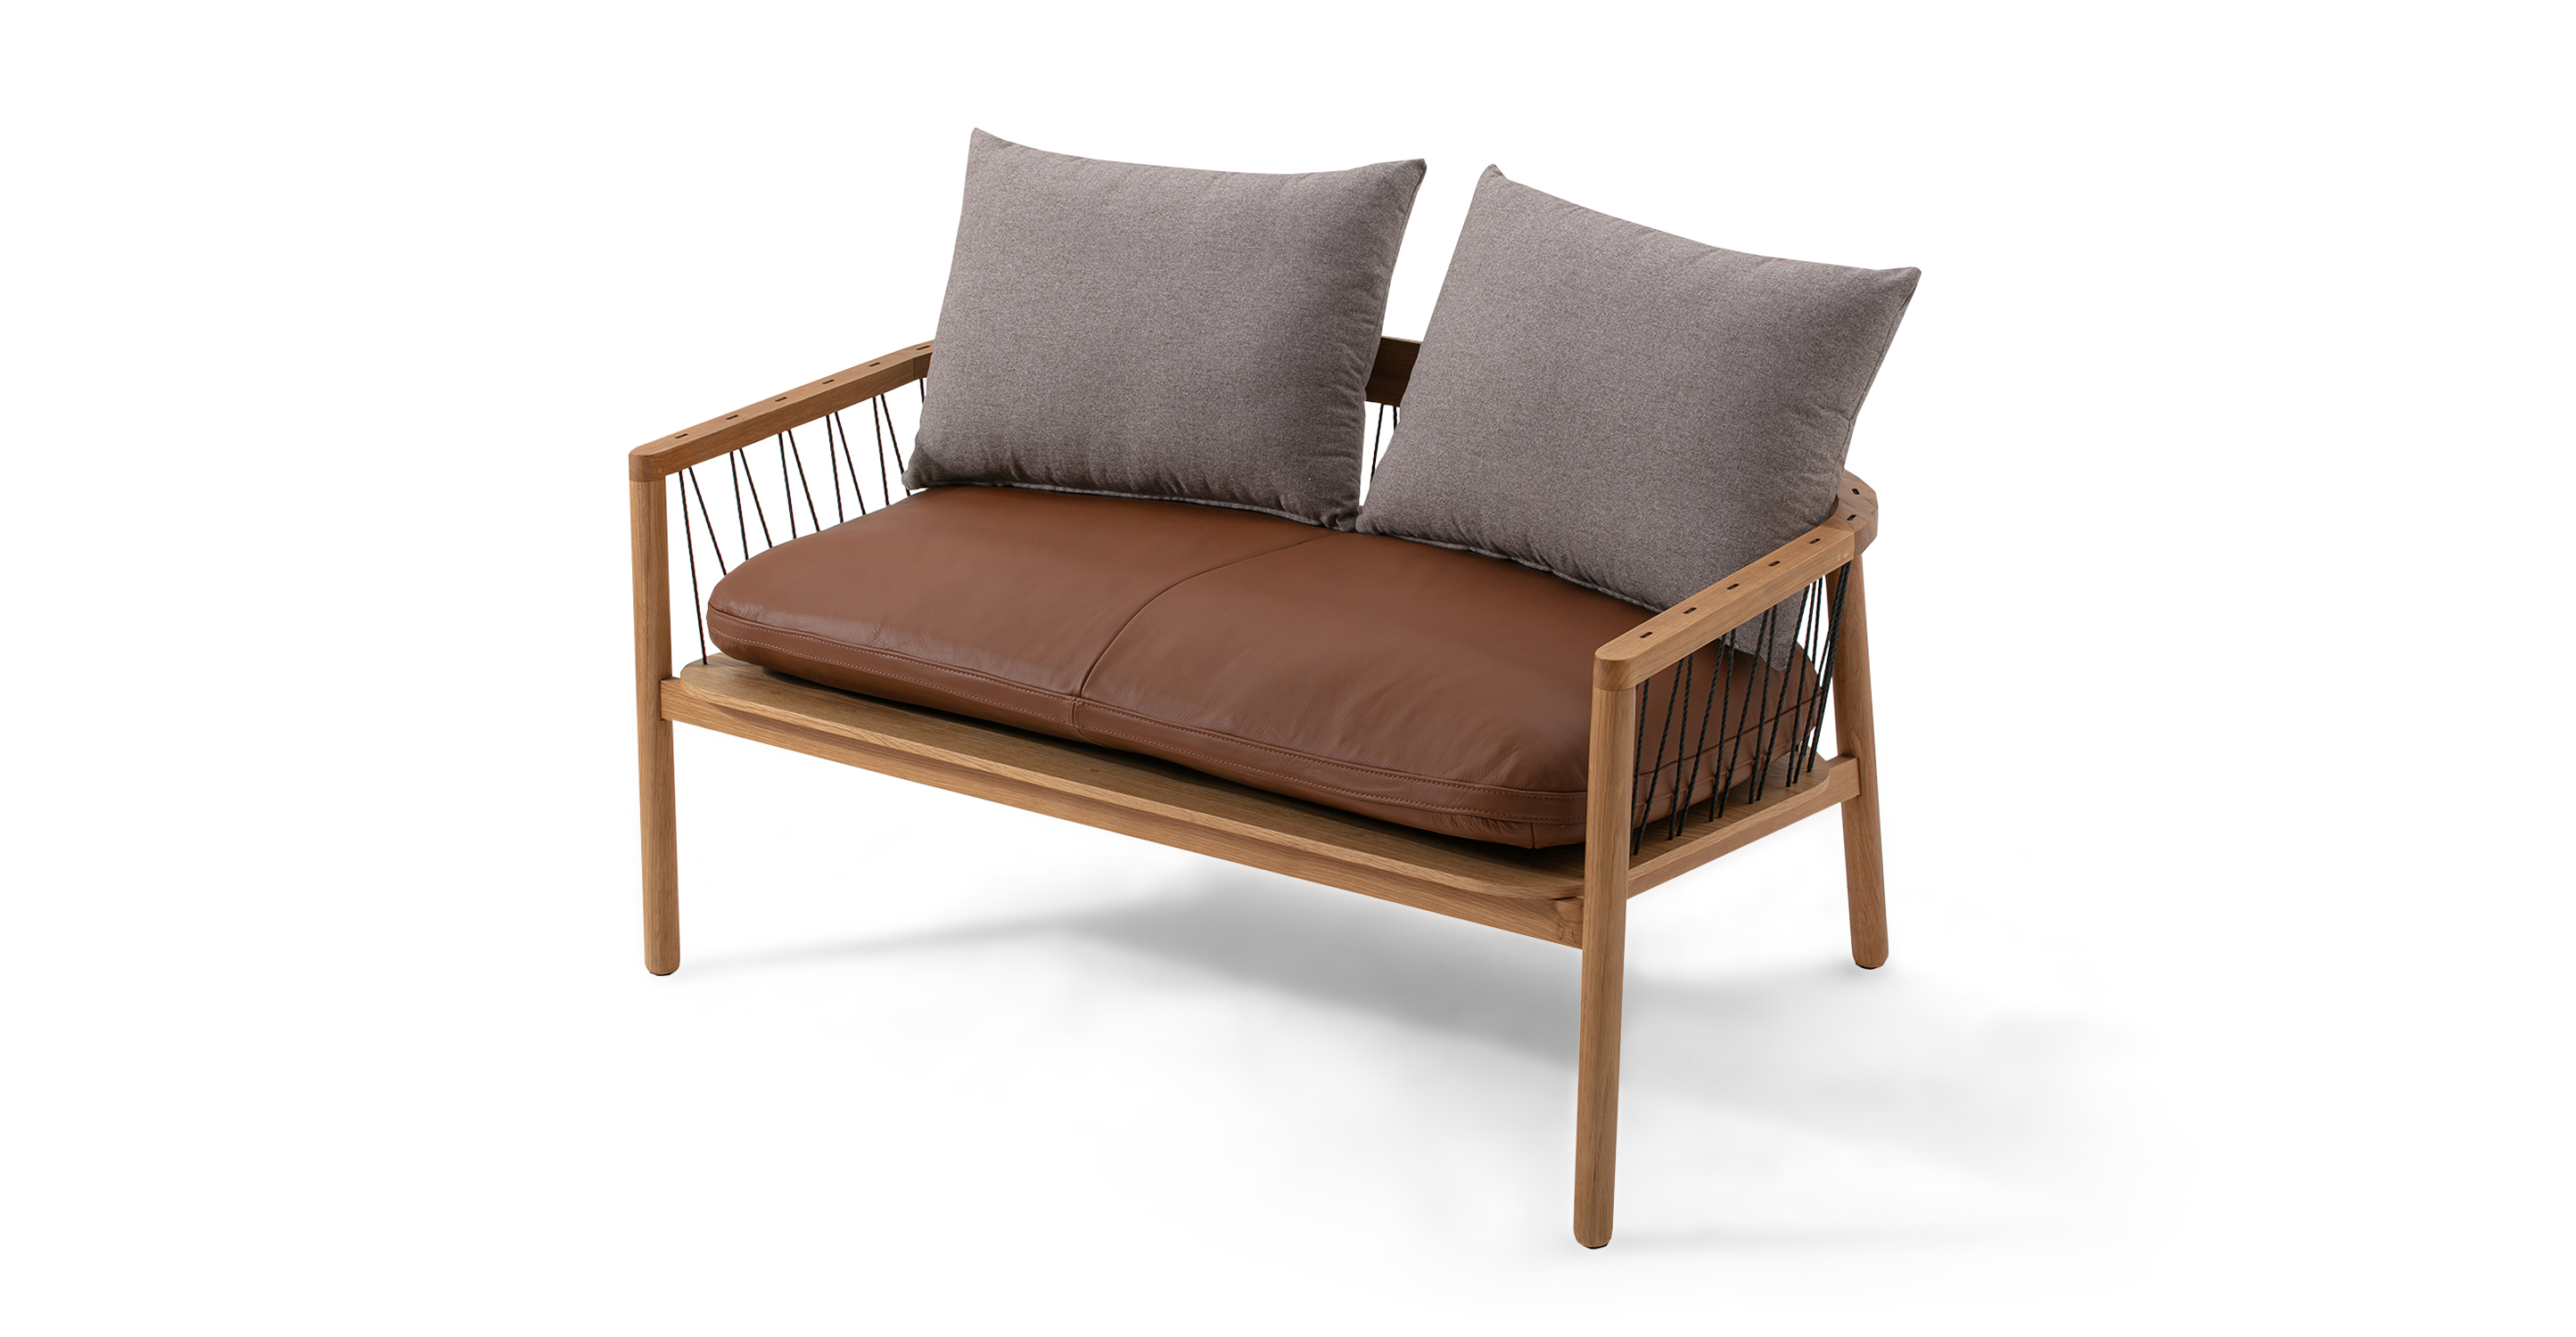 Image shows right facing view of Hatch Contemporary Stand-Alone Sofa with two detached Back Cushions in Norway Fabric Stone and one detached seat cushion in Patrol Bronze Genuine Leather. The sofa's frame is solid walnut wood, with black crosshatch string on the back and sides. 